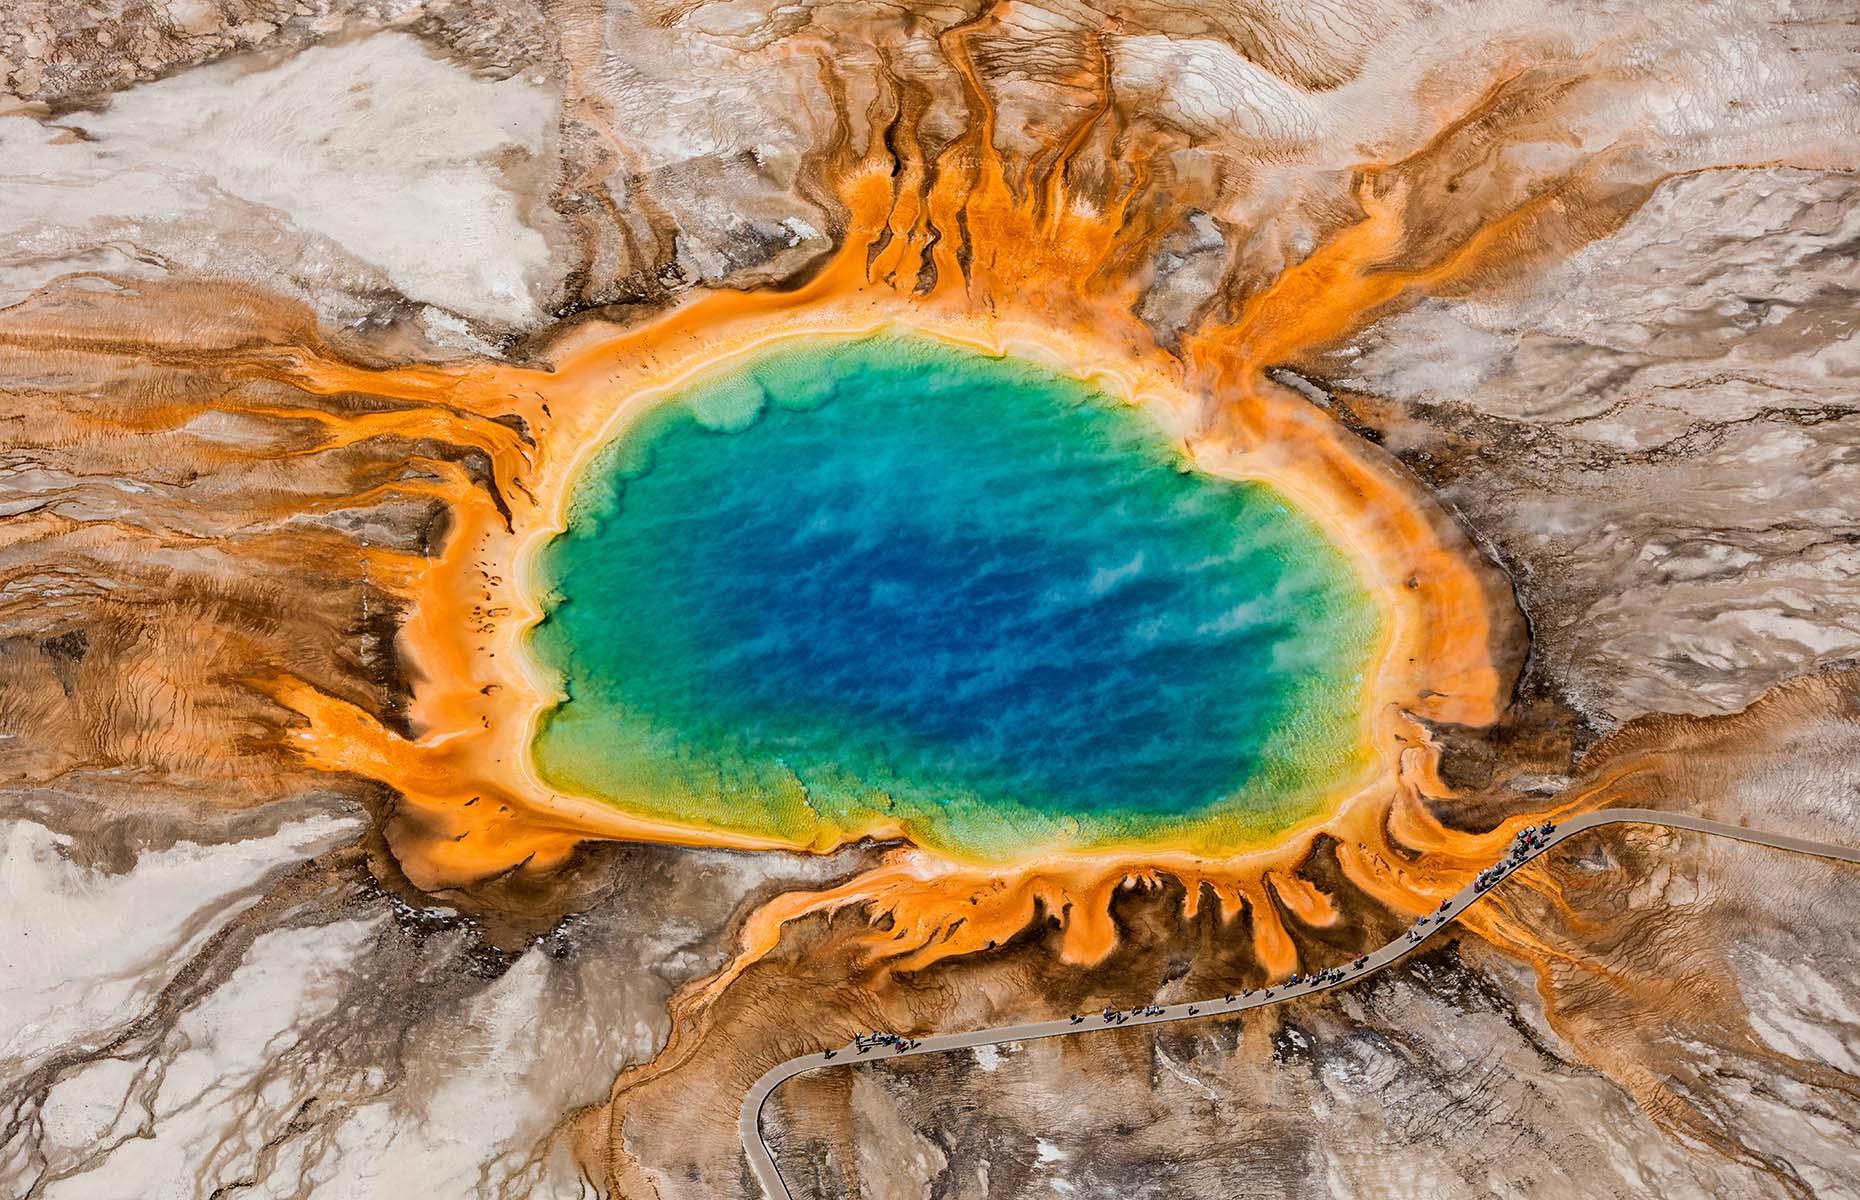 There's no way Yellowstone National Park's Grand Prismatic Spring could be left off this list. The vivid blue center of the geyser is surrounded by bands of glorious color, created by the heat-loving bacteria that live there. From above, the pool looks just like a surreal watercolor painting. With a depth of 164 feet (50m), the spring reaches temperatures of 160°F (70°C).